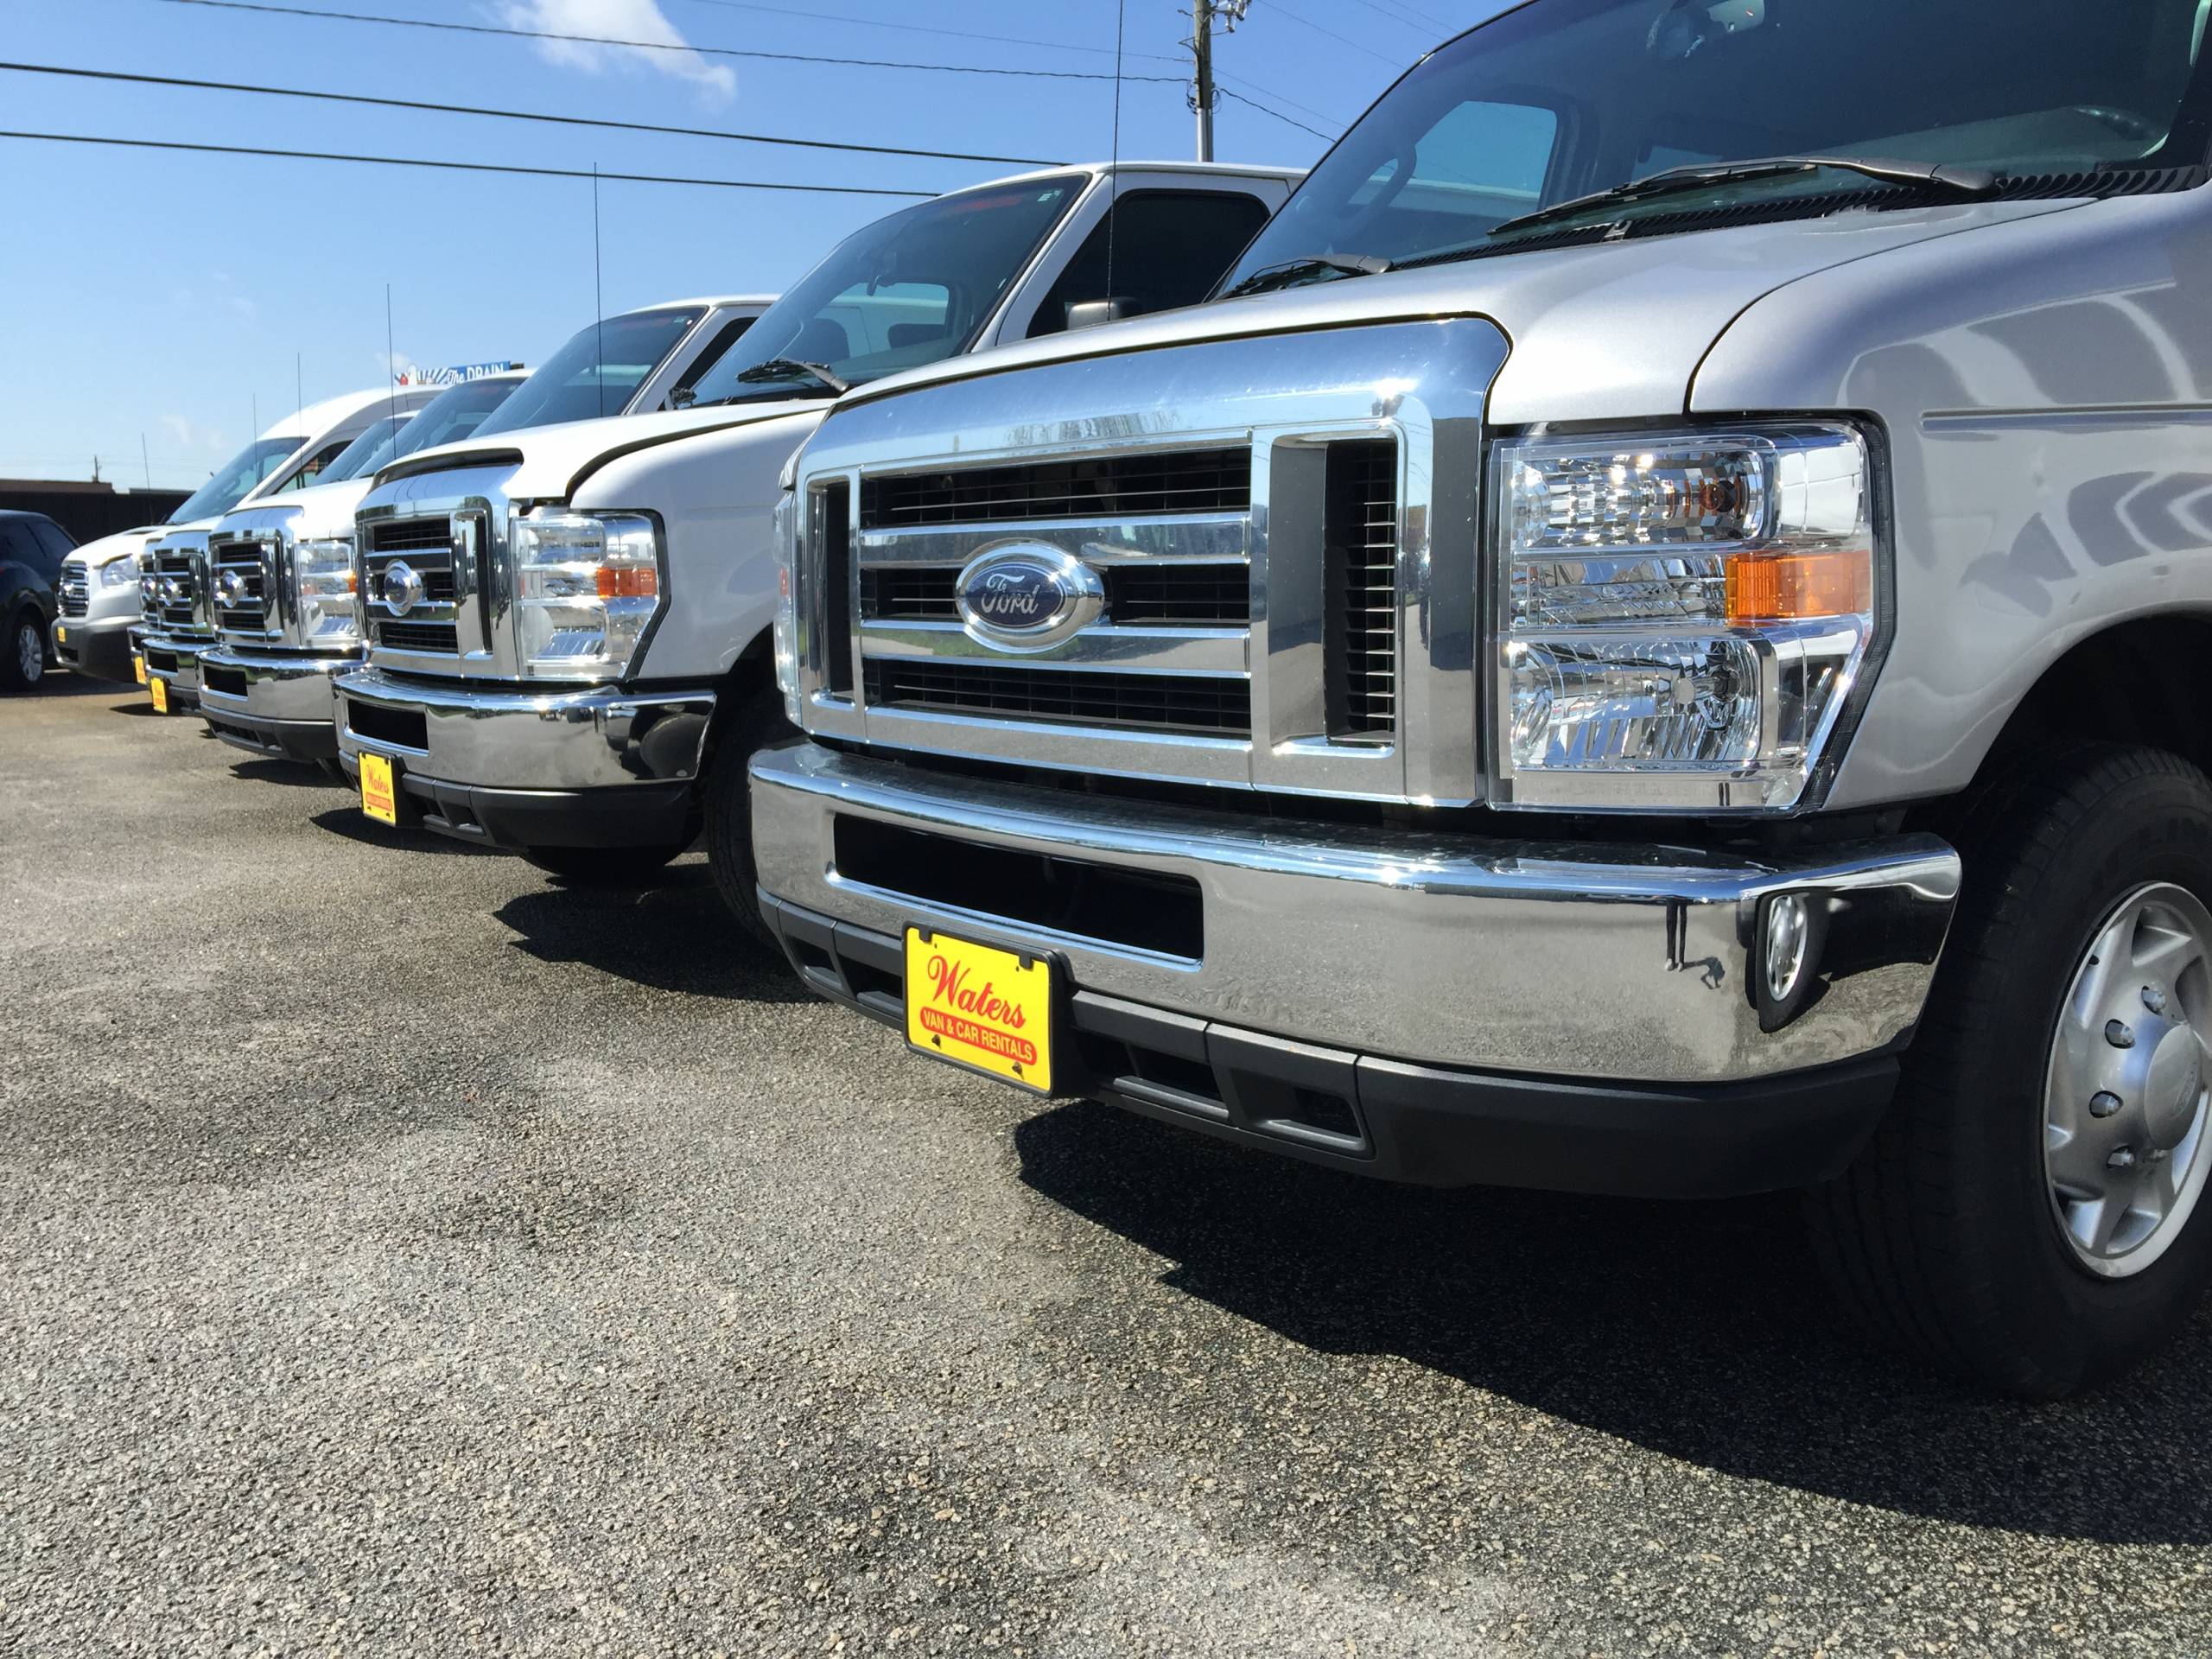 Waters Van & Car Rentals & Sales be the first call you make for vehicle rentals in Augusta, GA and surrounding areas.